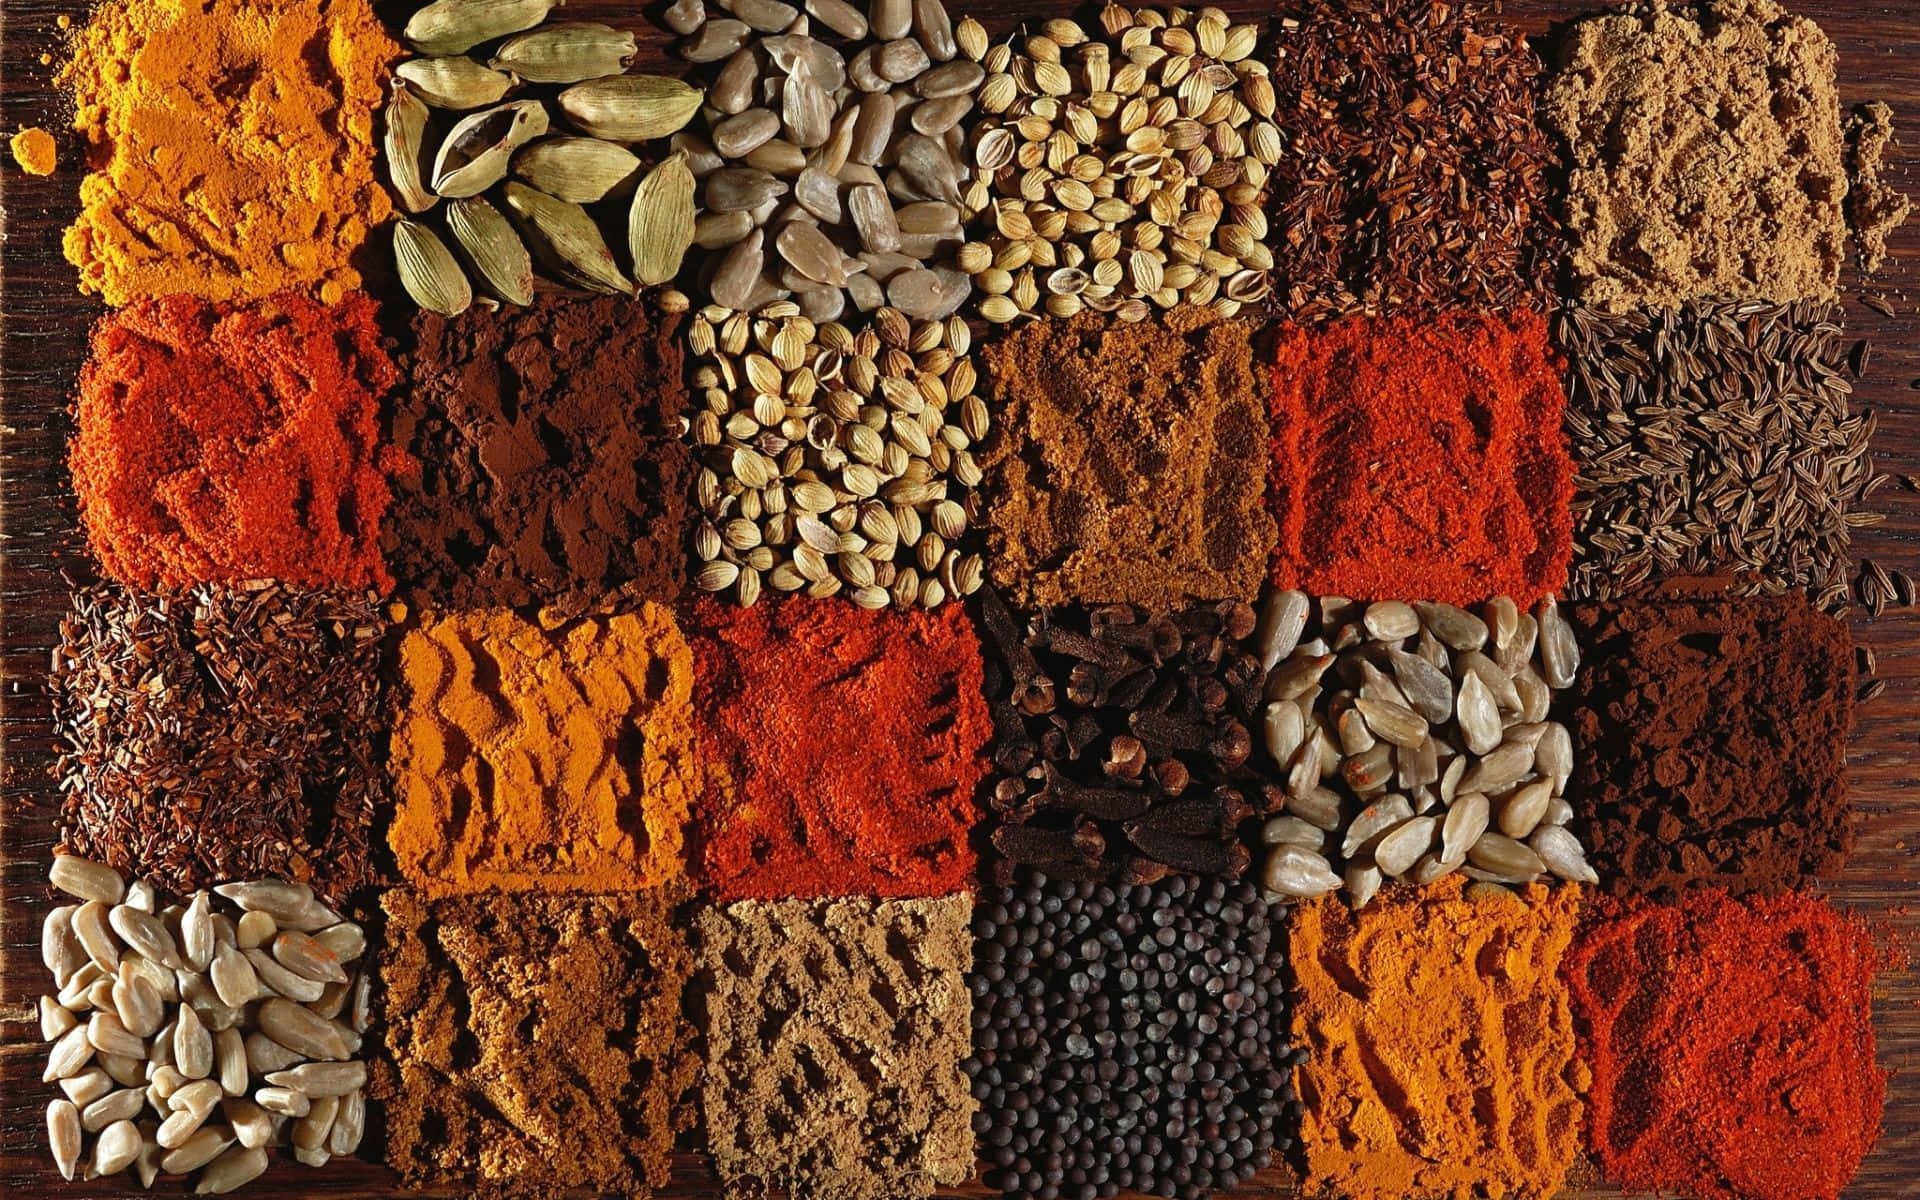 Square Shaped Spices On Wooden Surface Wallpaper